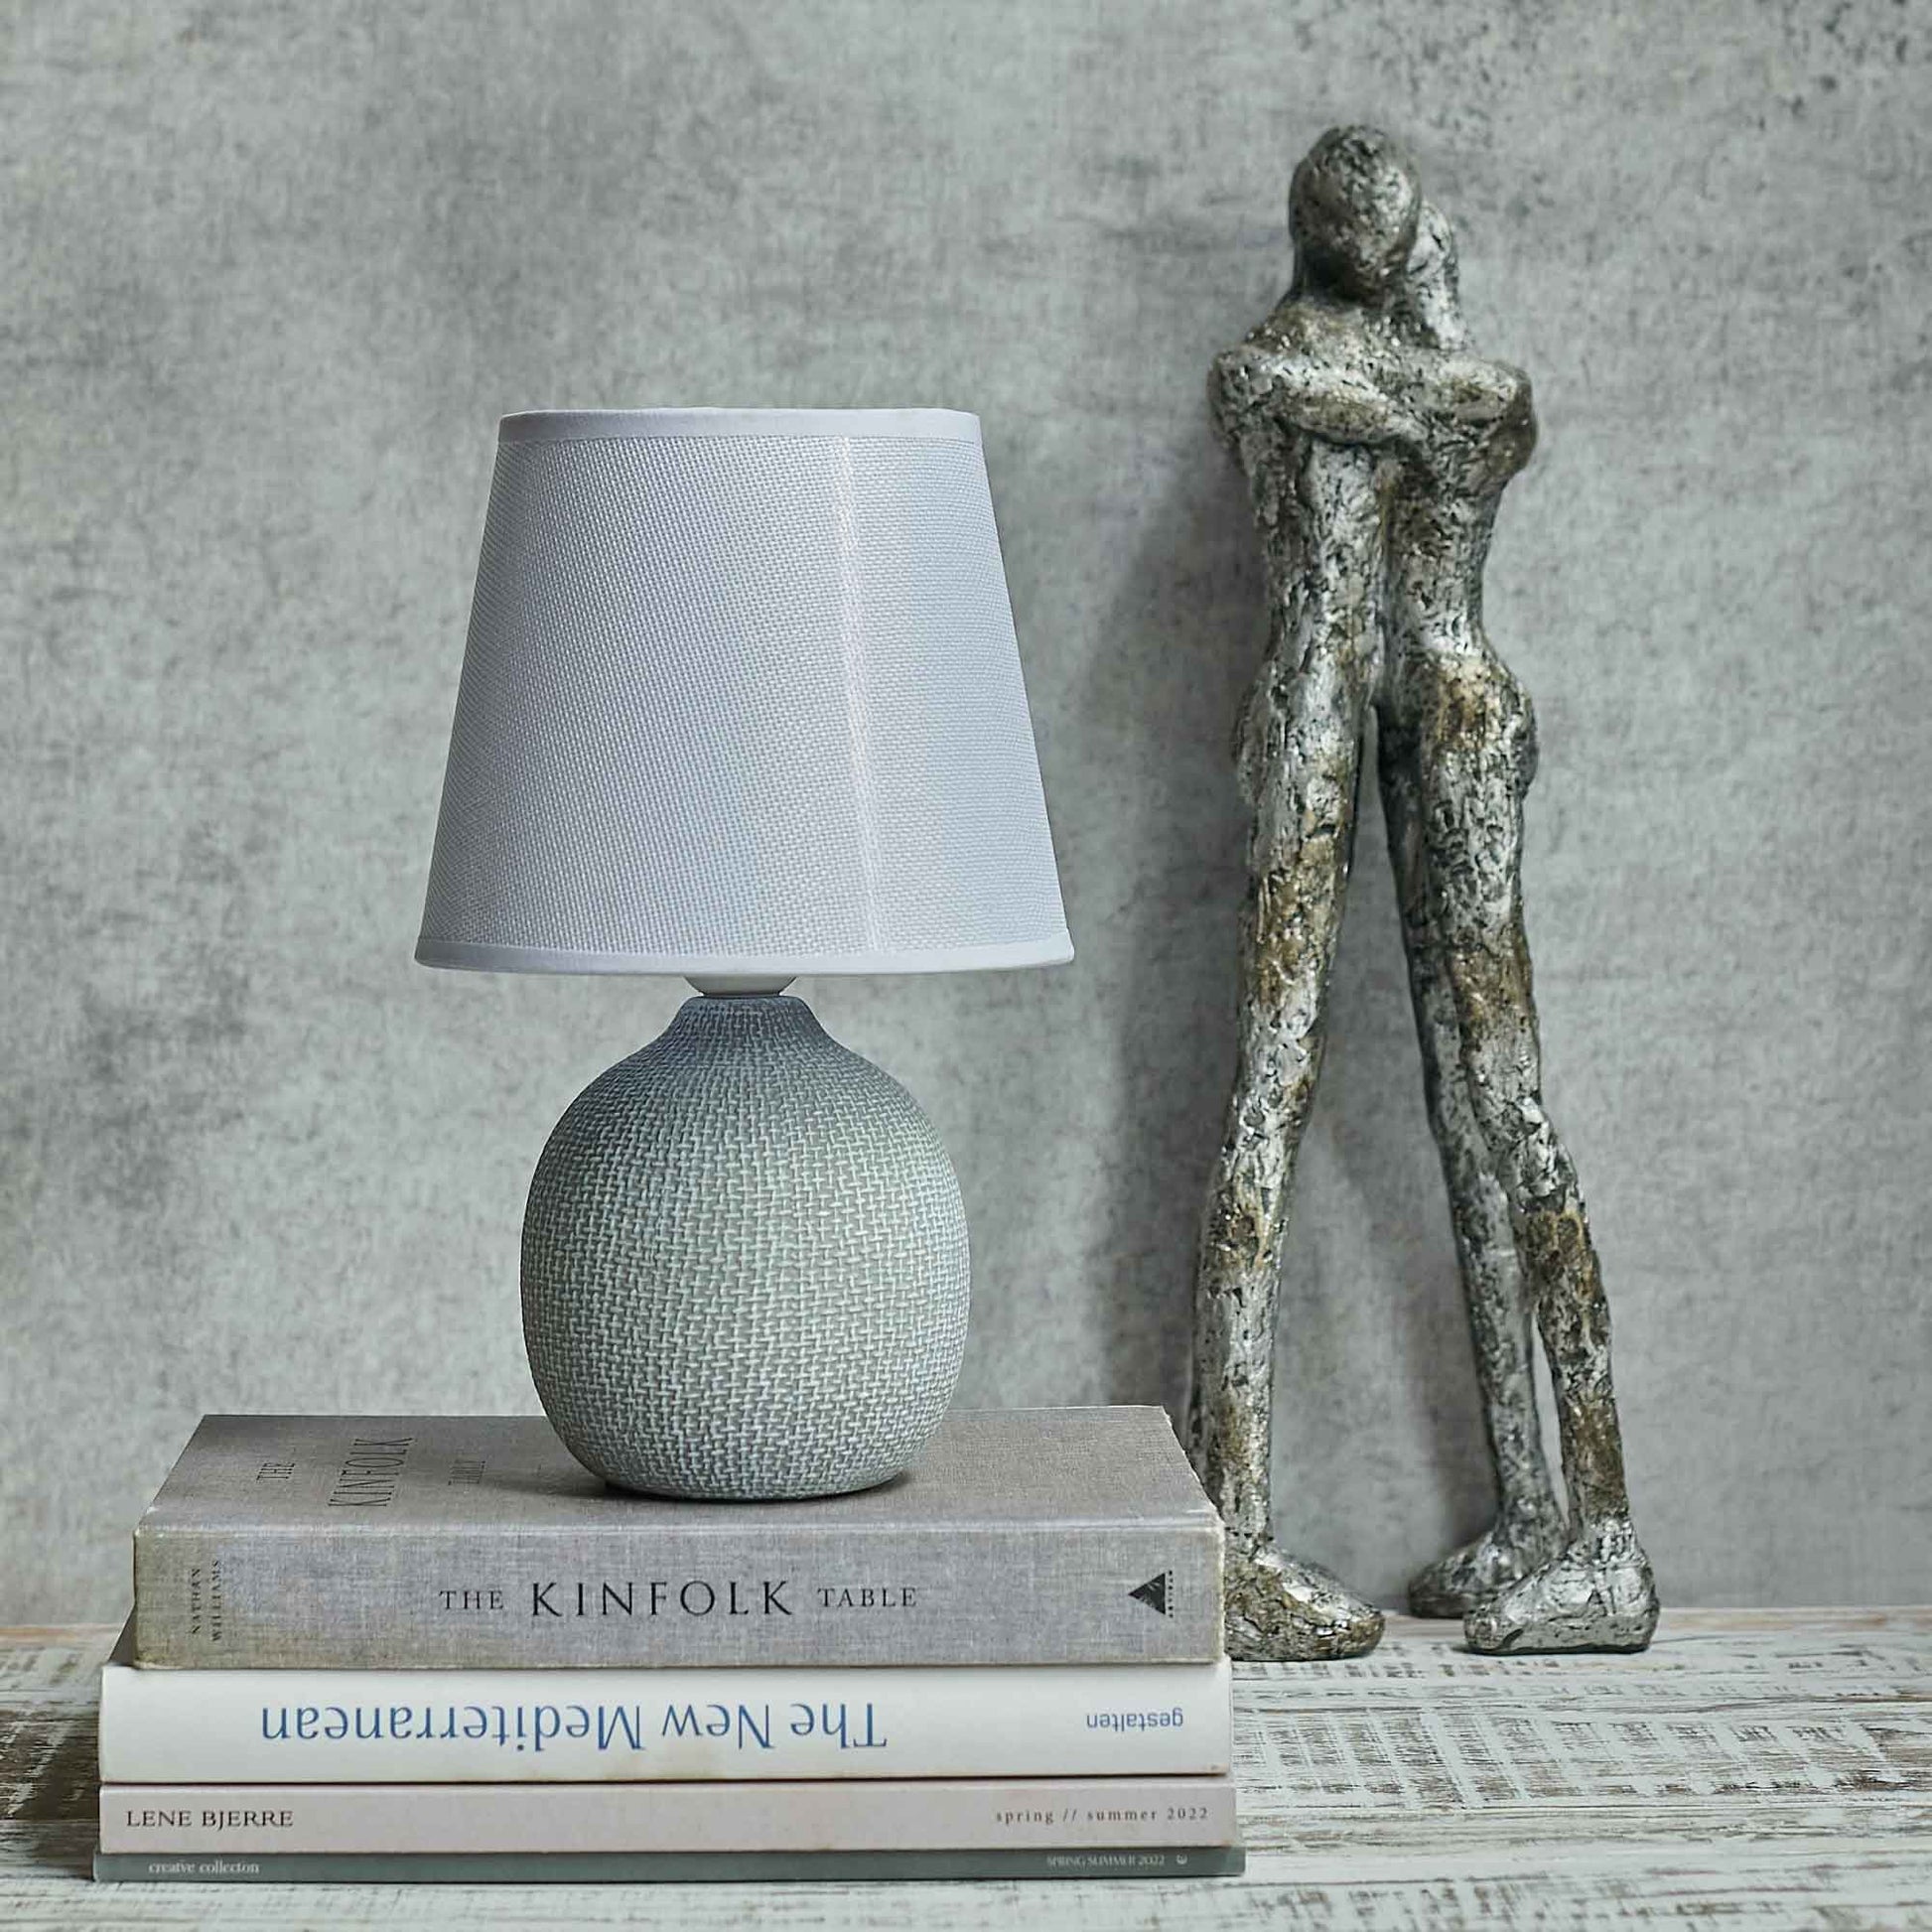 Short round grey table lamp sat on a stack of books in front of two hugging figurines